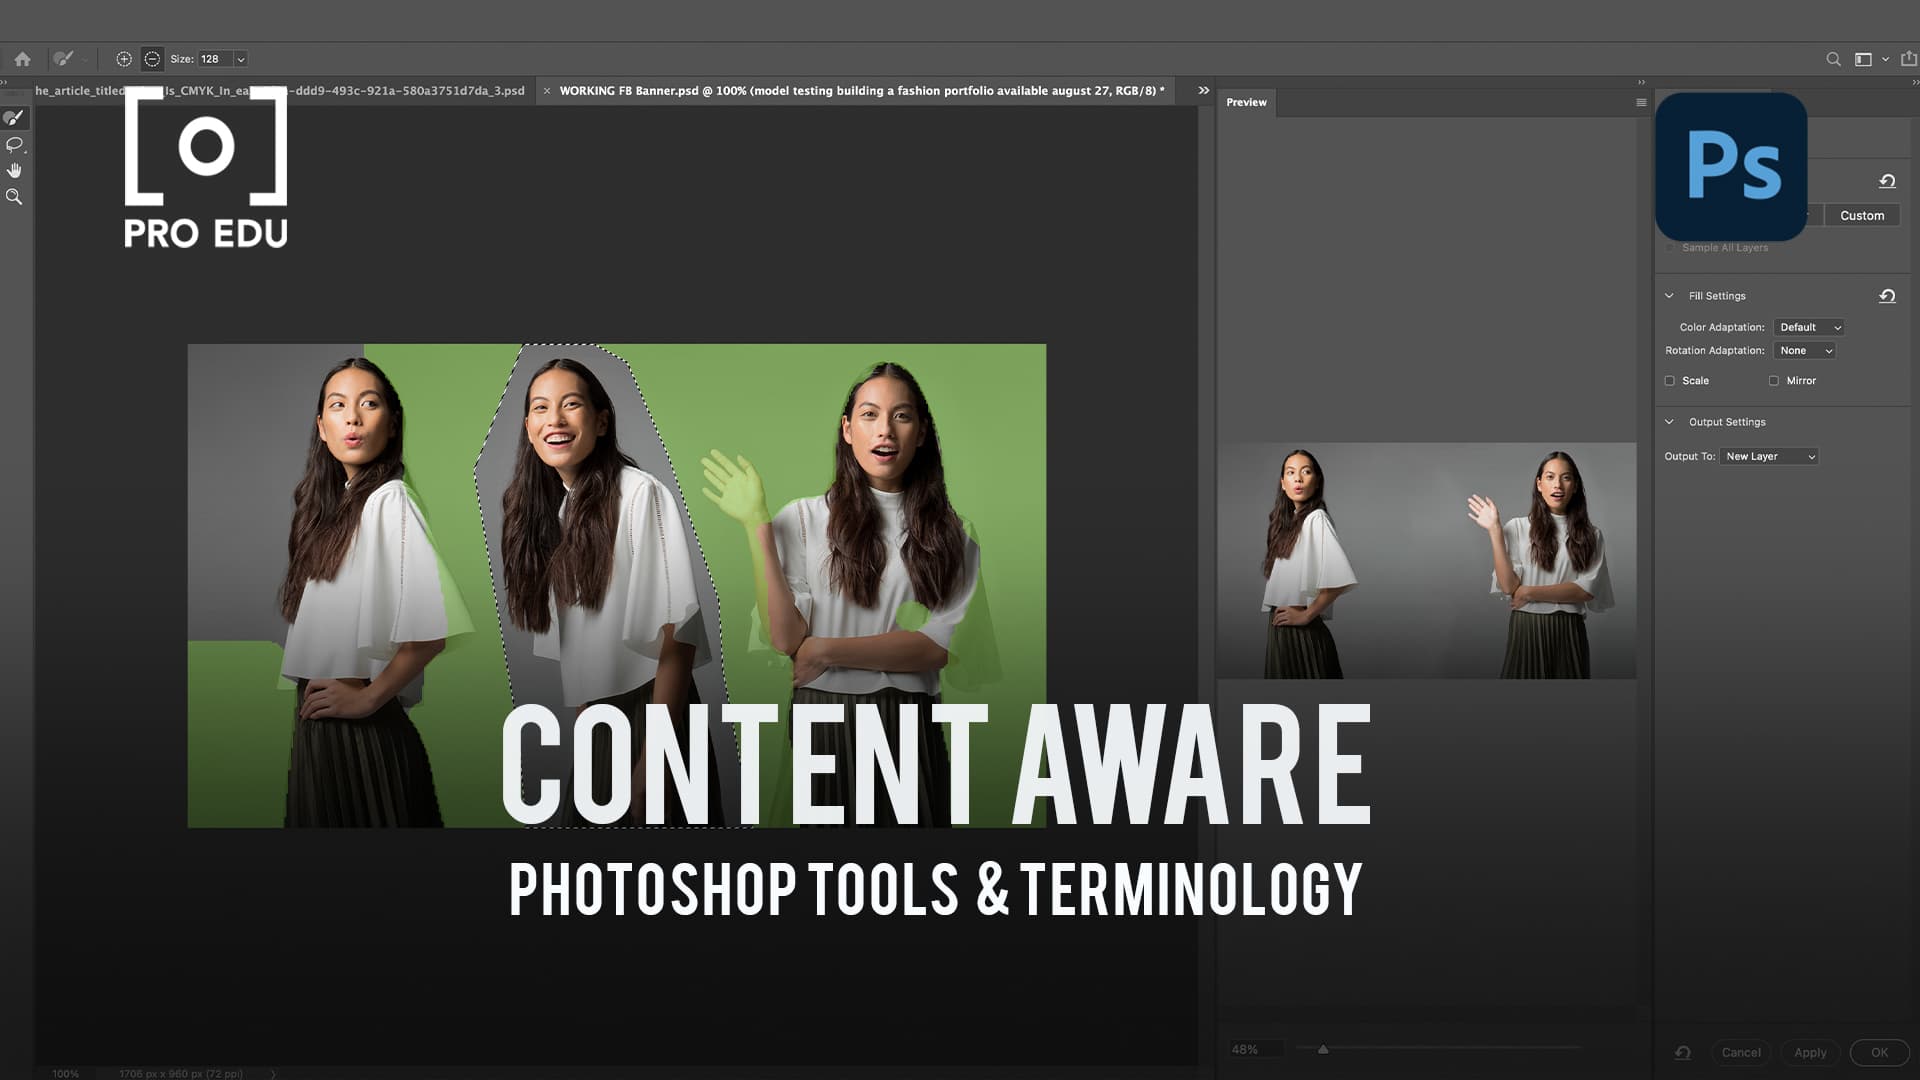 Content-Aware Tools in Photoshop - PRO EDU Guide